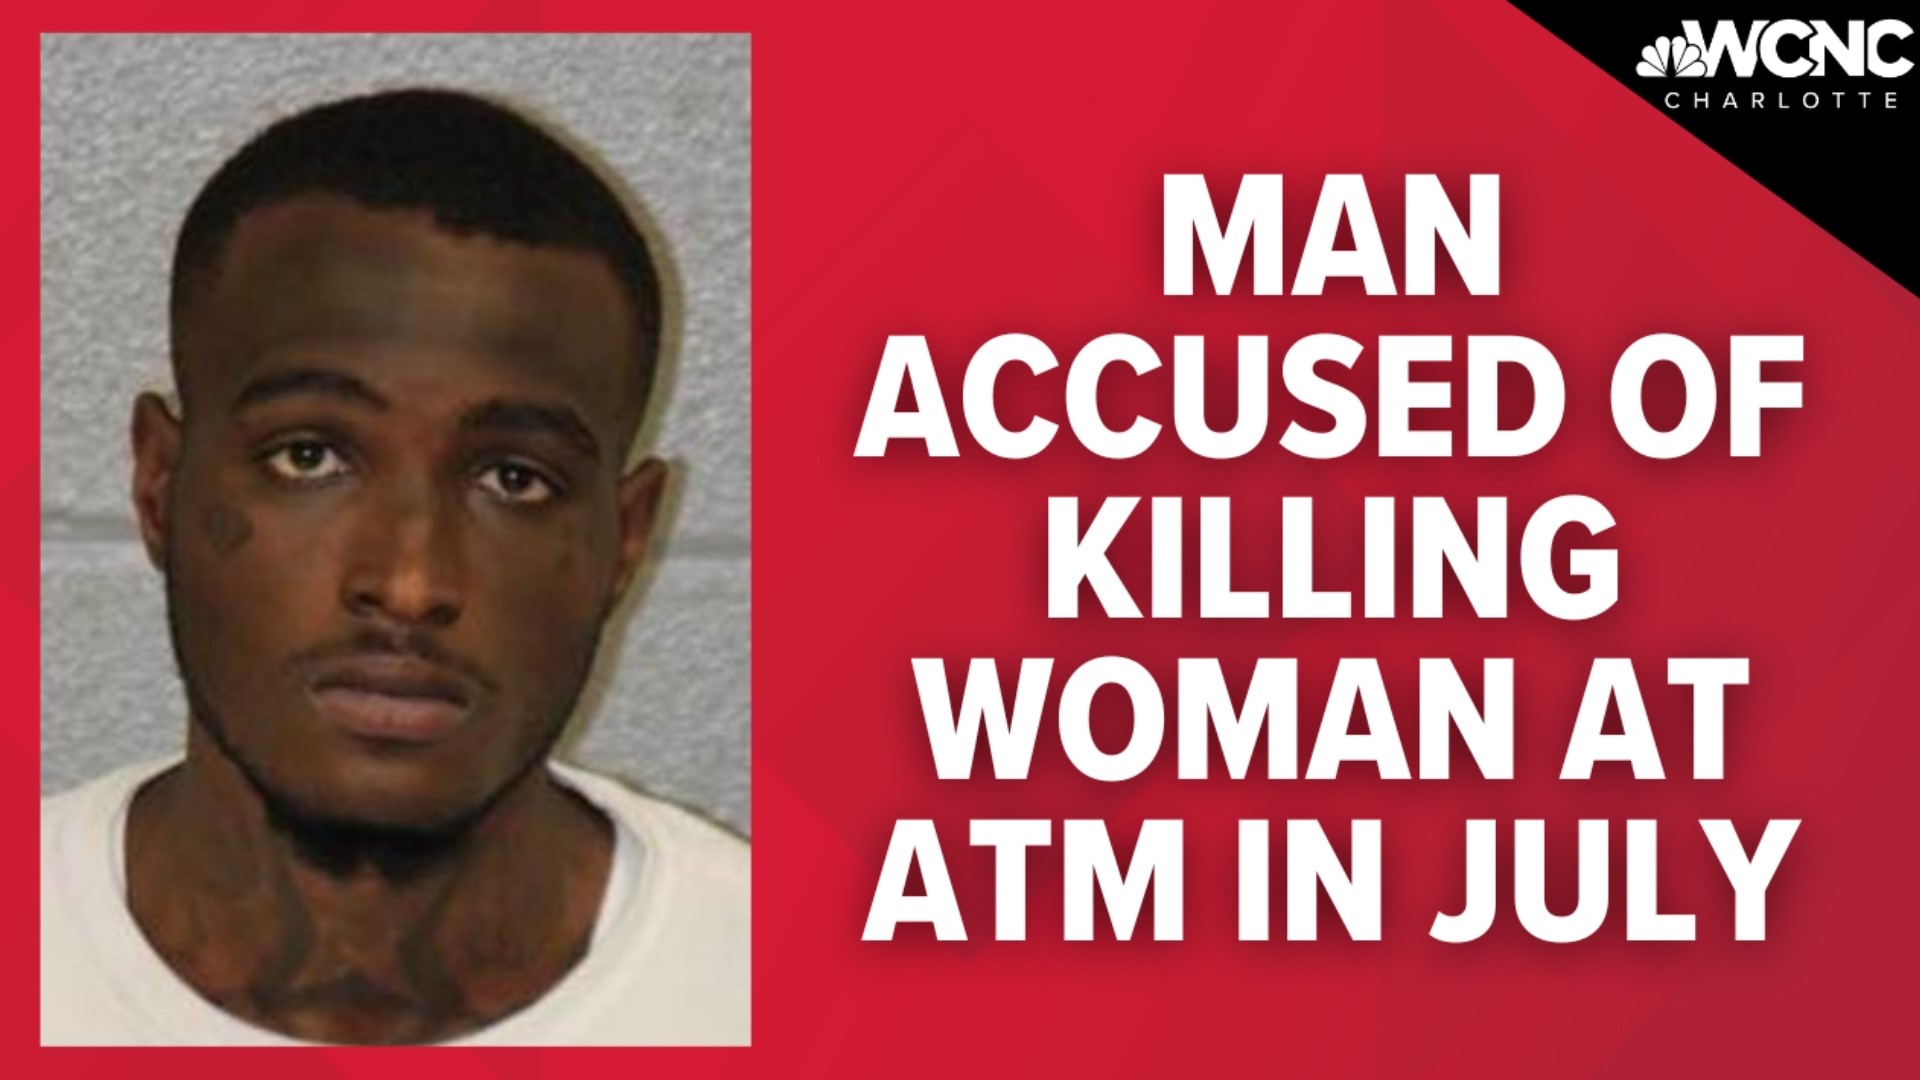 A man is facing a first-degree murder charge for the death of a woman who was shot and killed at an ATM in July.